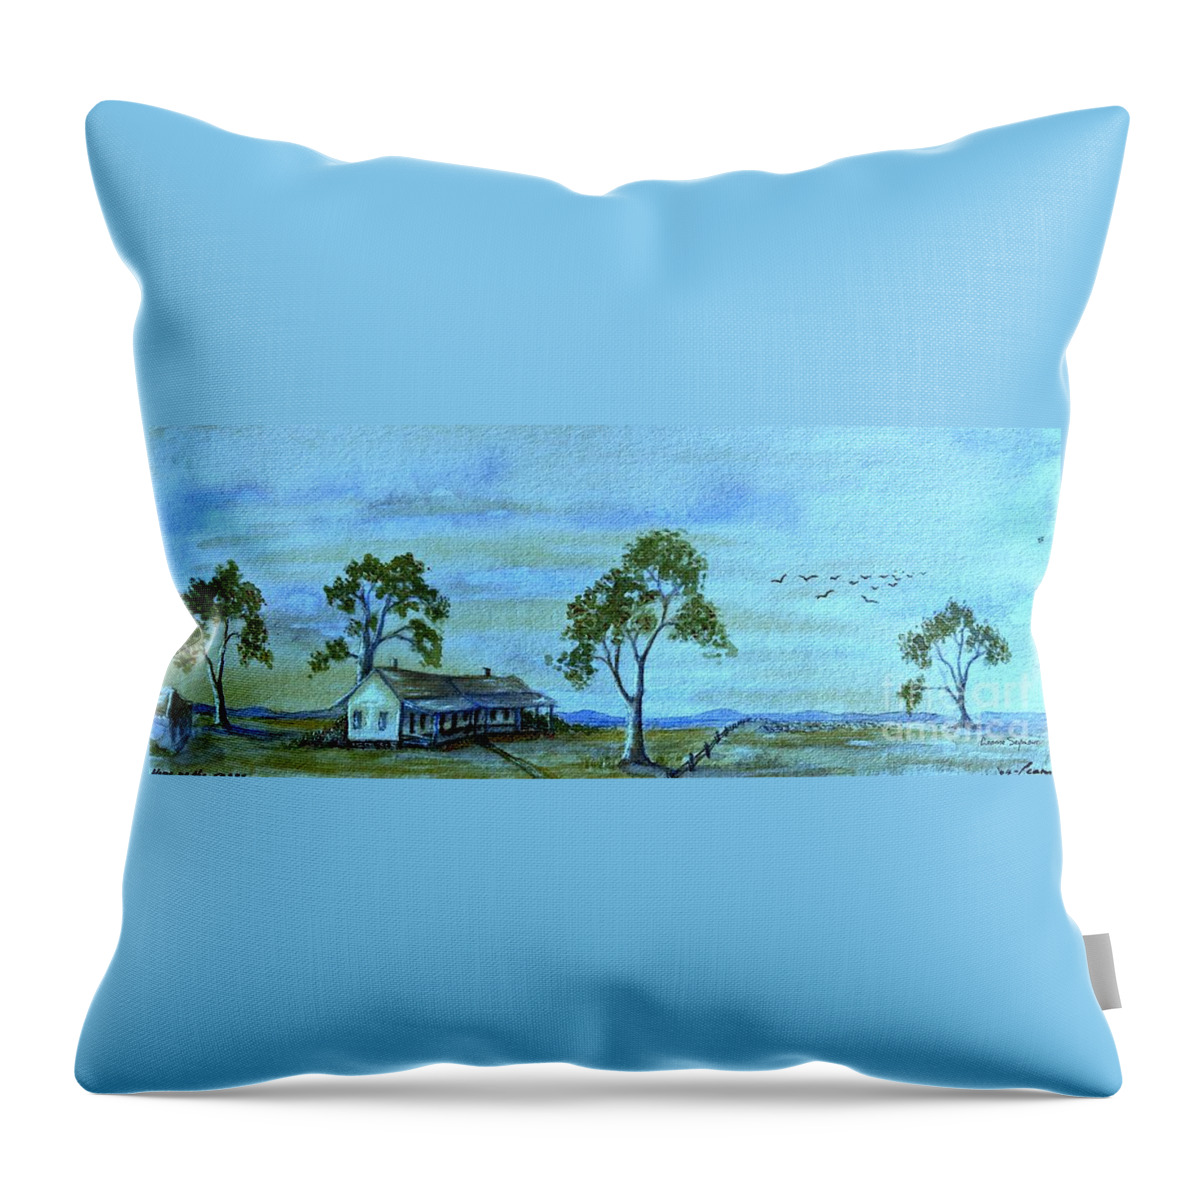 Australian Landscape Throw Pillow featuring the painting Home On The Range by Leanne Seymour